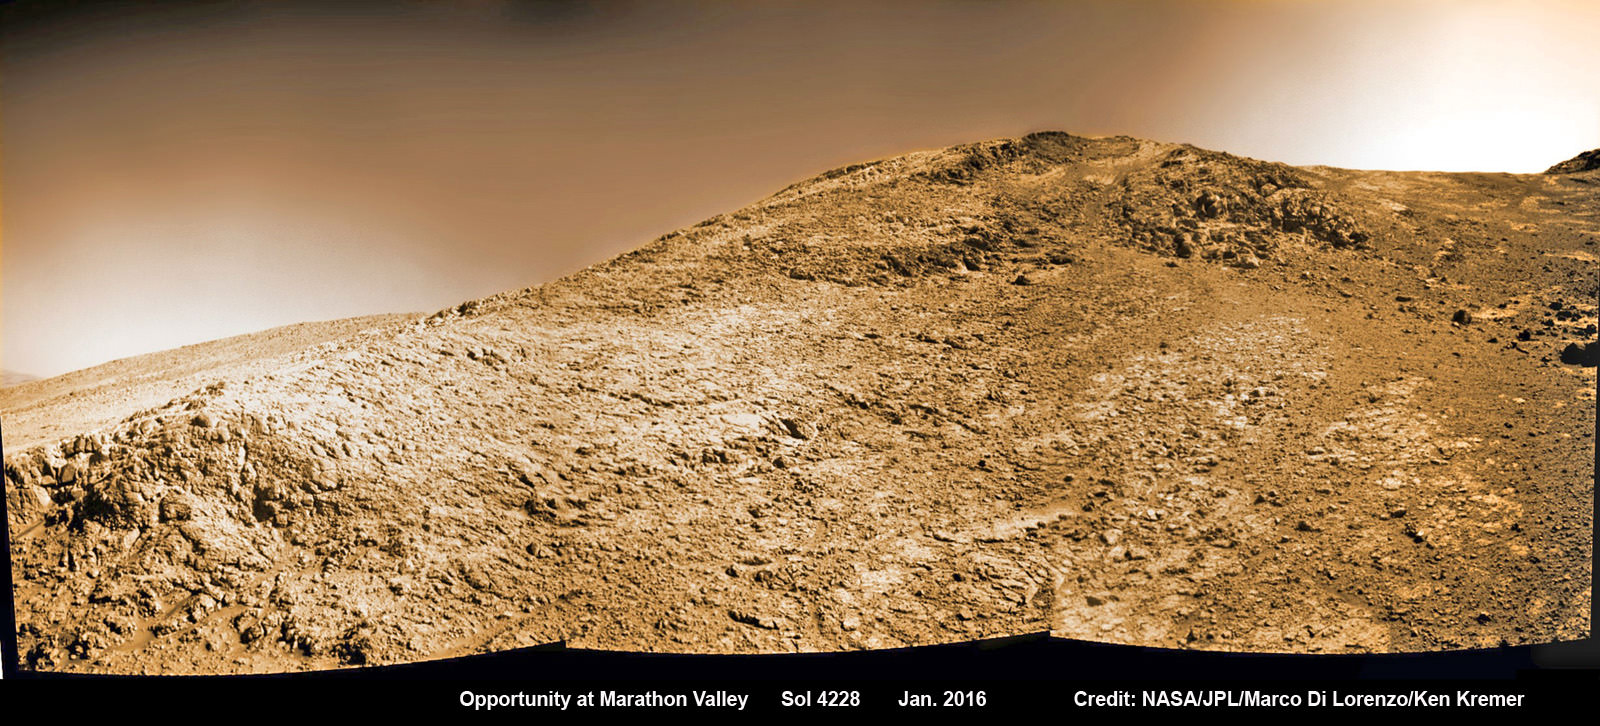 NASA’s Opportunity rover images current worksite at Knudsen Ridge on Sol 4228 where the robot is grinding into rock targets inside Marathon Valley during 12th Anniversary of touchdown on Mars in Jan. 2016.  Credit: NASA/JPL/Cornell/Marco Di Lorenzo/Ken Kremer/kenkremer.com